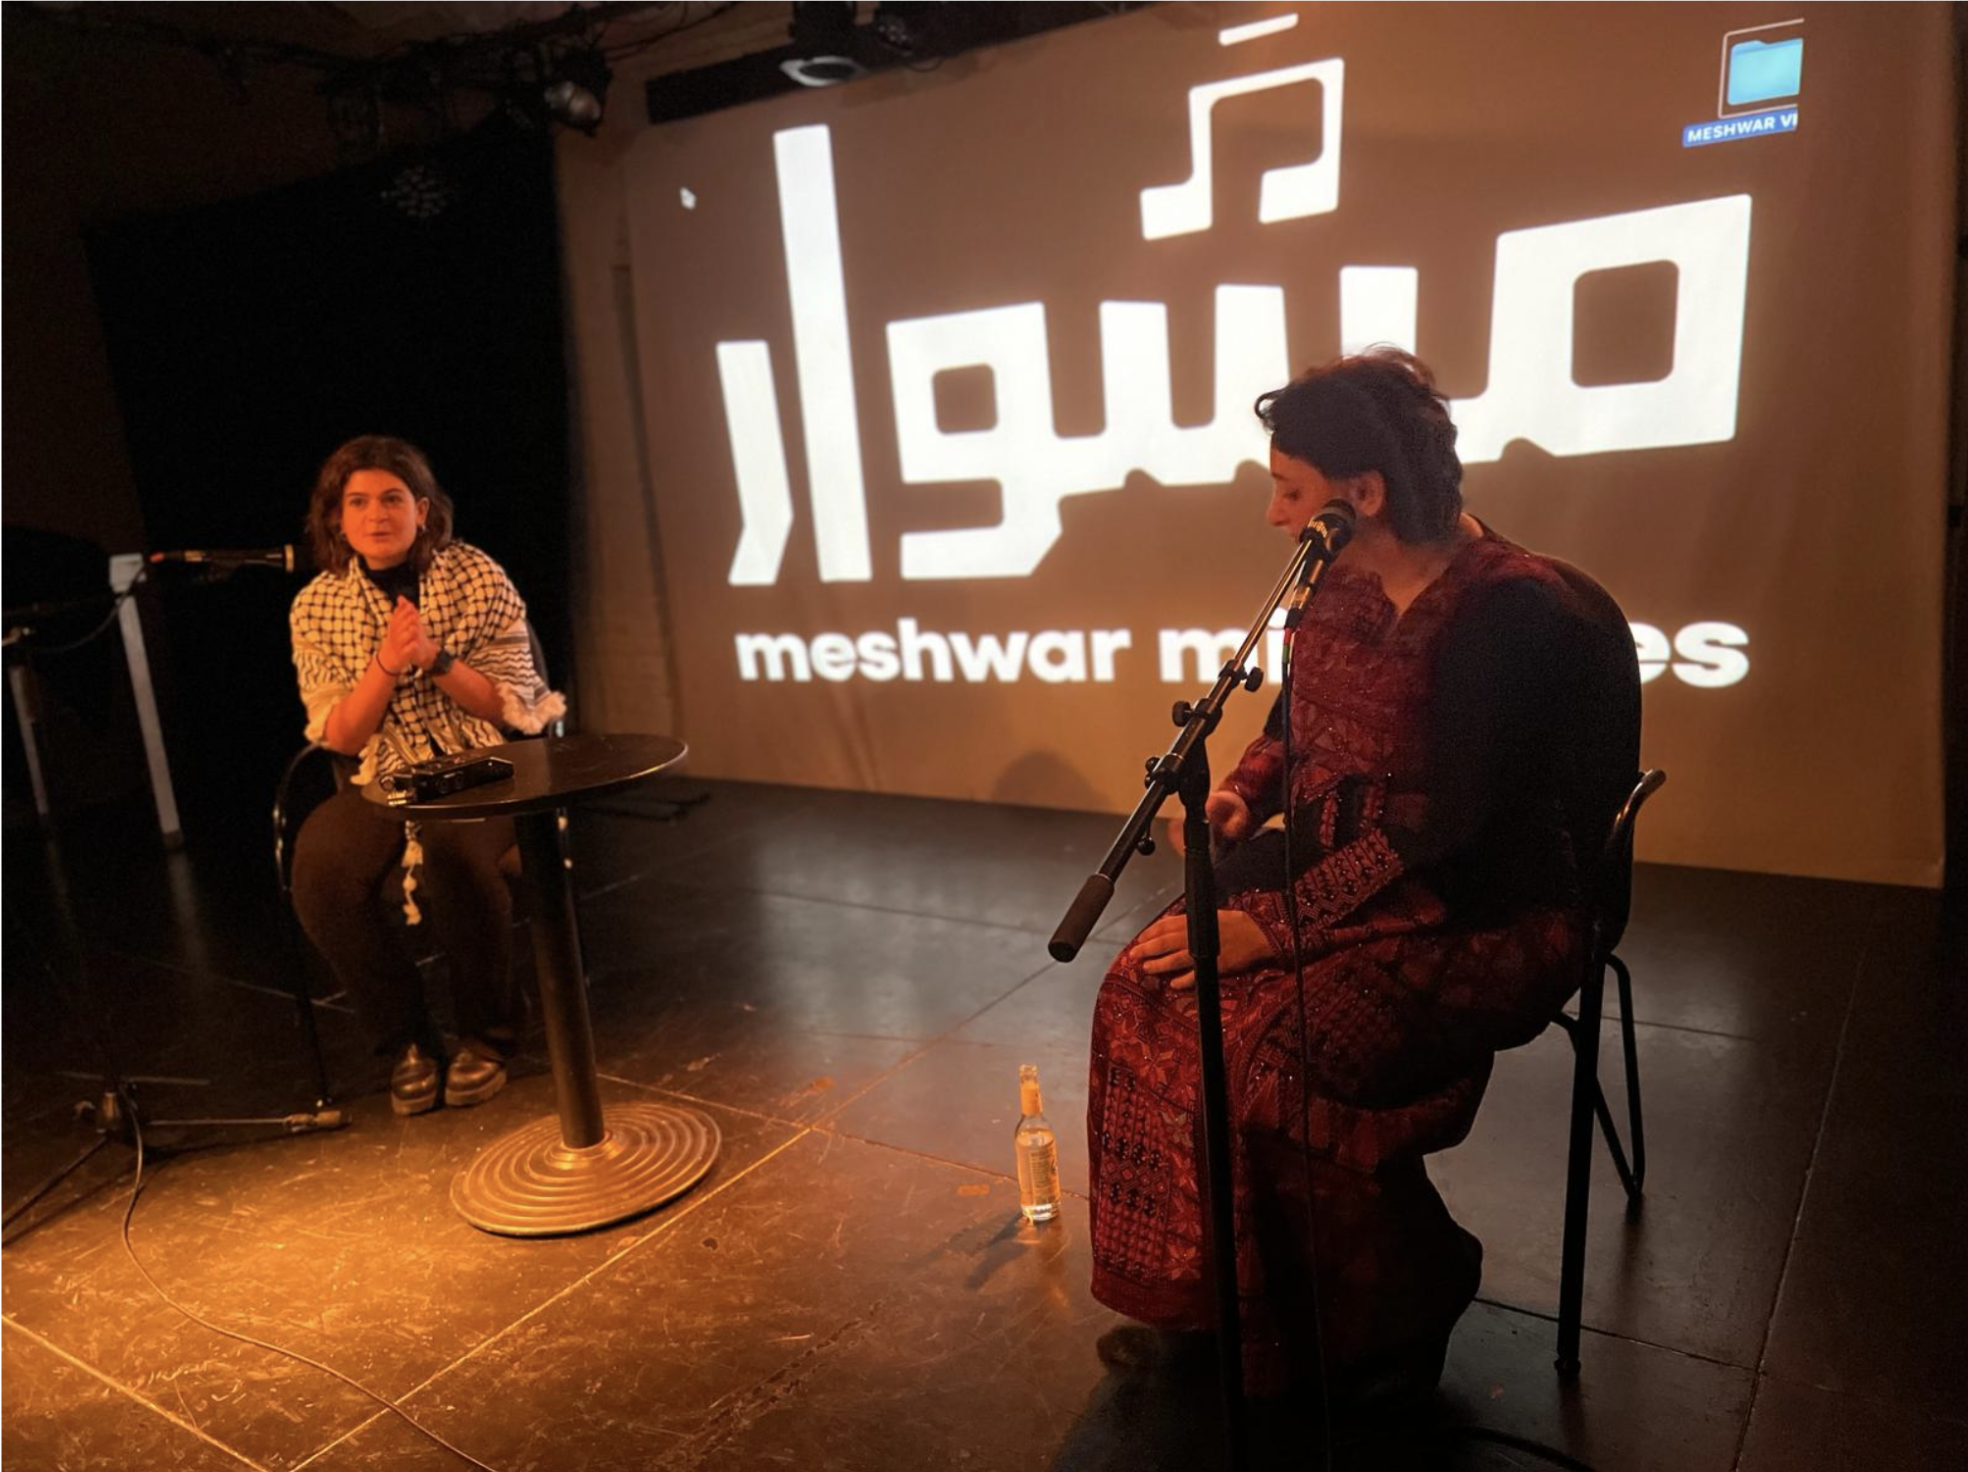 Meshwar Mixtapes

Meshwar Mixtapes hosts collective listening sessions, like "Meshwar To Palestine," using music, storytelling, and visuals to explore global south cultures. The project amplifies marginalized voices and fosters empathy and understanding, promoting cross-cultural dialogue and solidarity through music and storytelling.